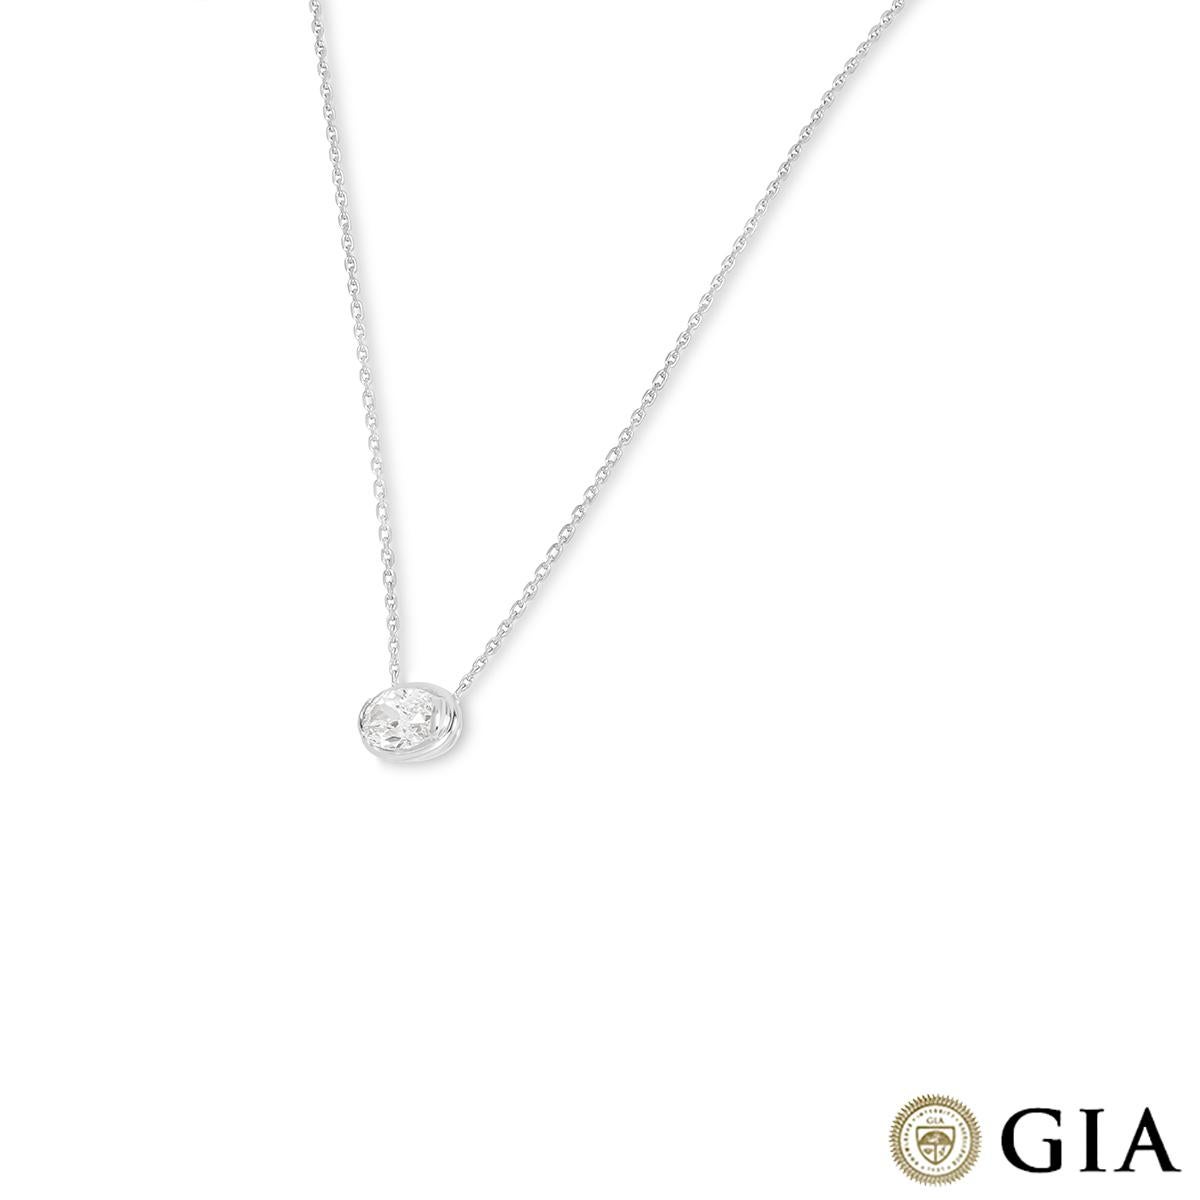 A luxurious platinum diamond pendant. Showcased in the centre of a tension mount is an oval cut diamond weighing 3.00ct, D colour and VS1 clarity. The pendant is evenly suspended from a 16-inch trace chain that finishes with a spring ring clasp and